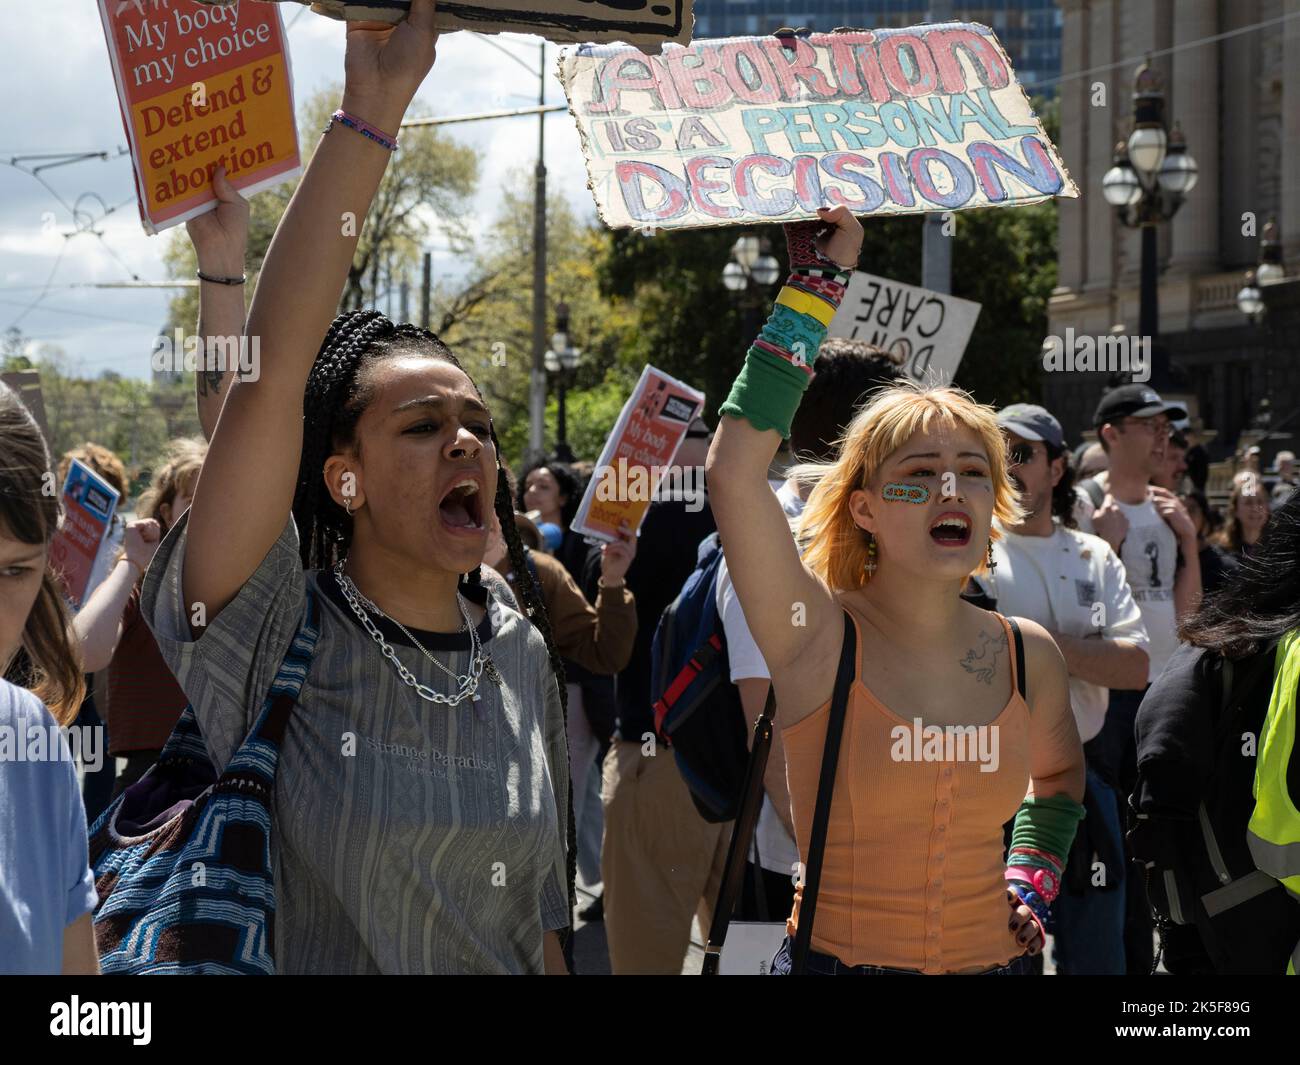 October 8th, 2022, Melbourne, Australia. Pro-abortion protesters chant at a counter-rally in response to MP Bernie Finn's March for the Babies. Credit: Jay Kogler/Alamy Live News Stock Photo